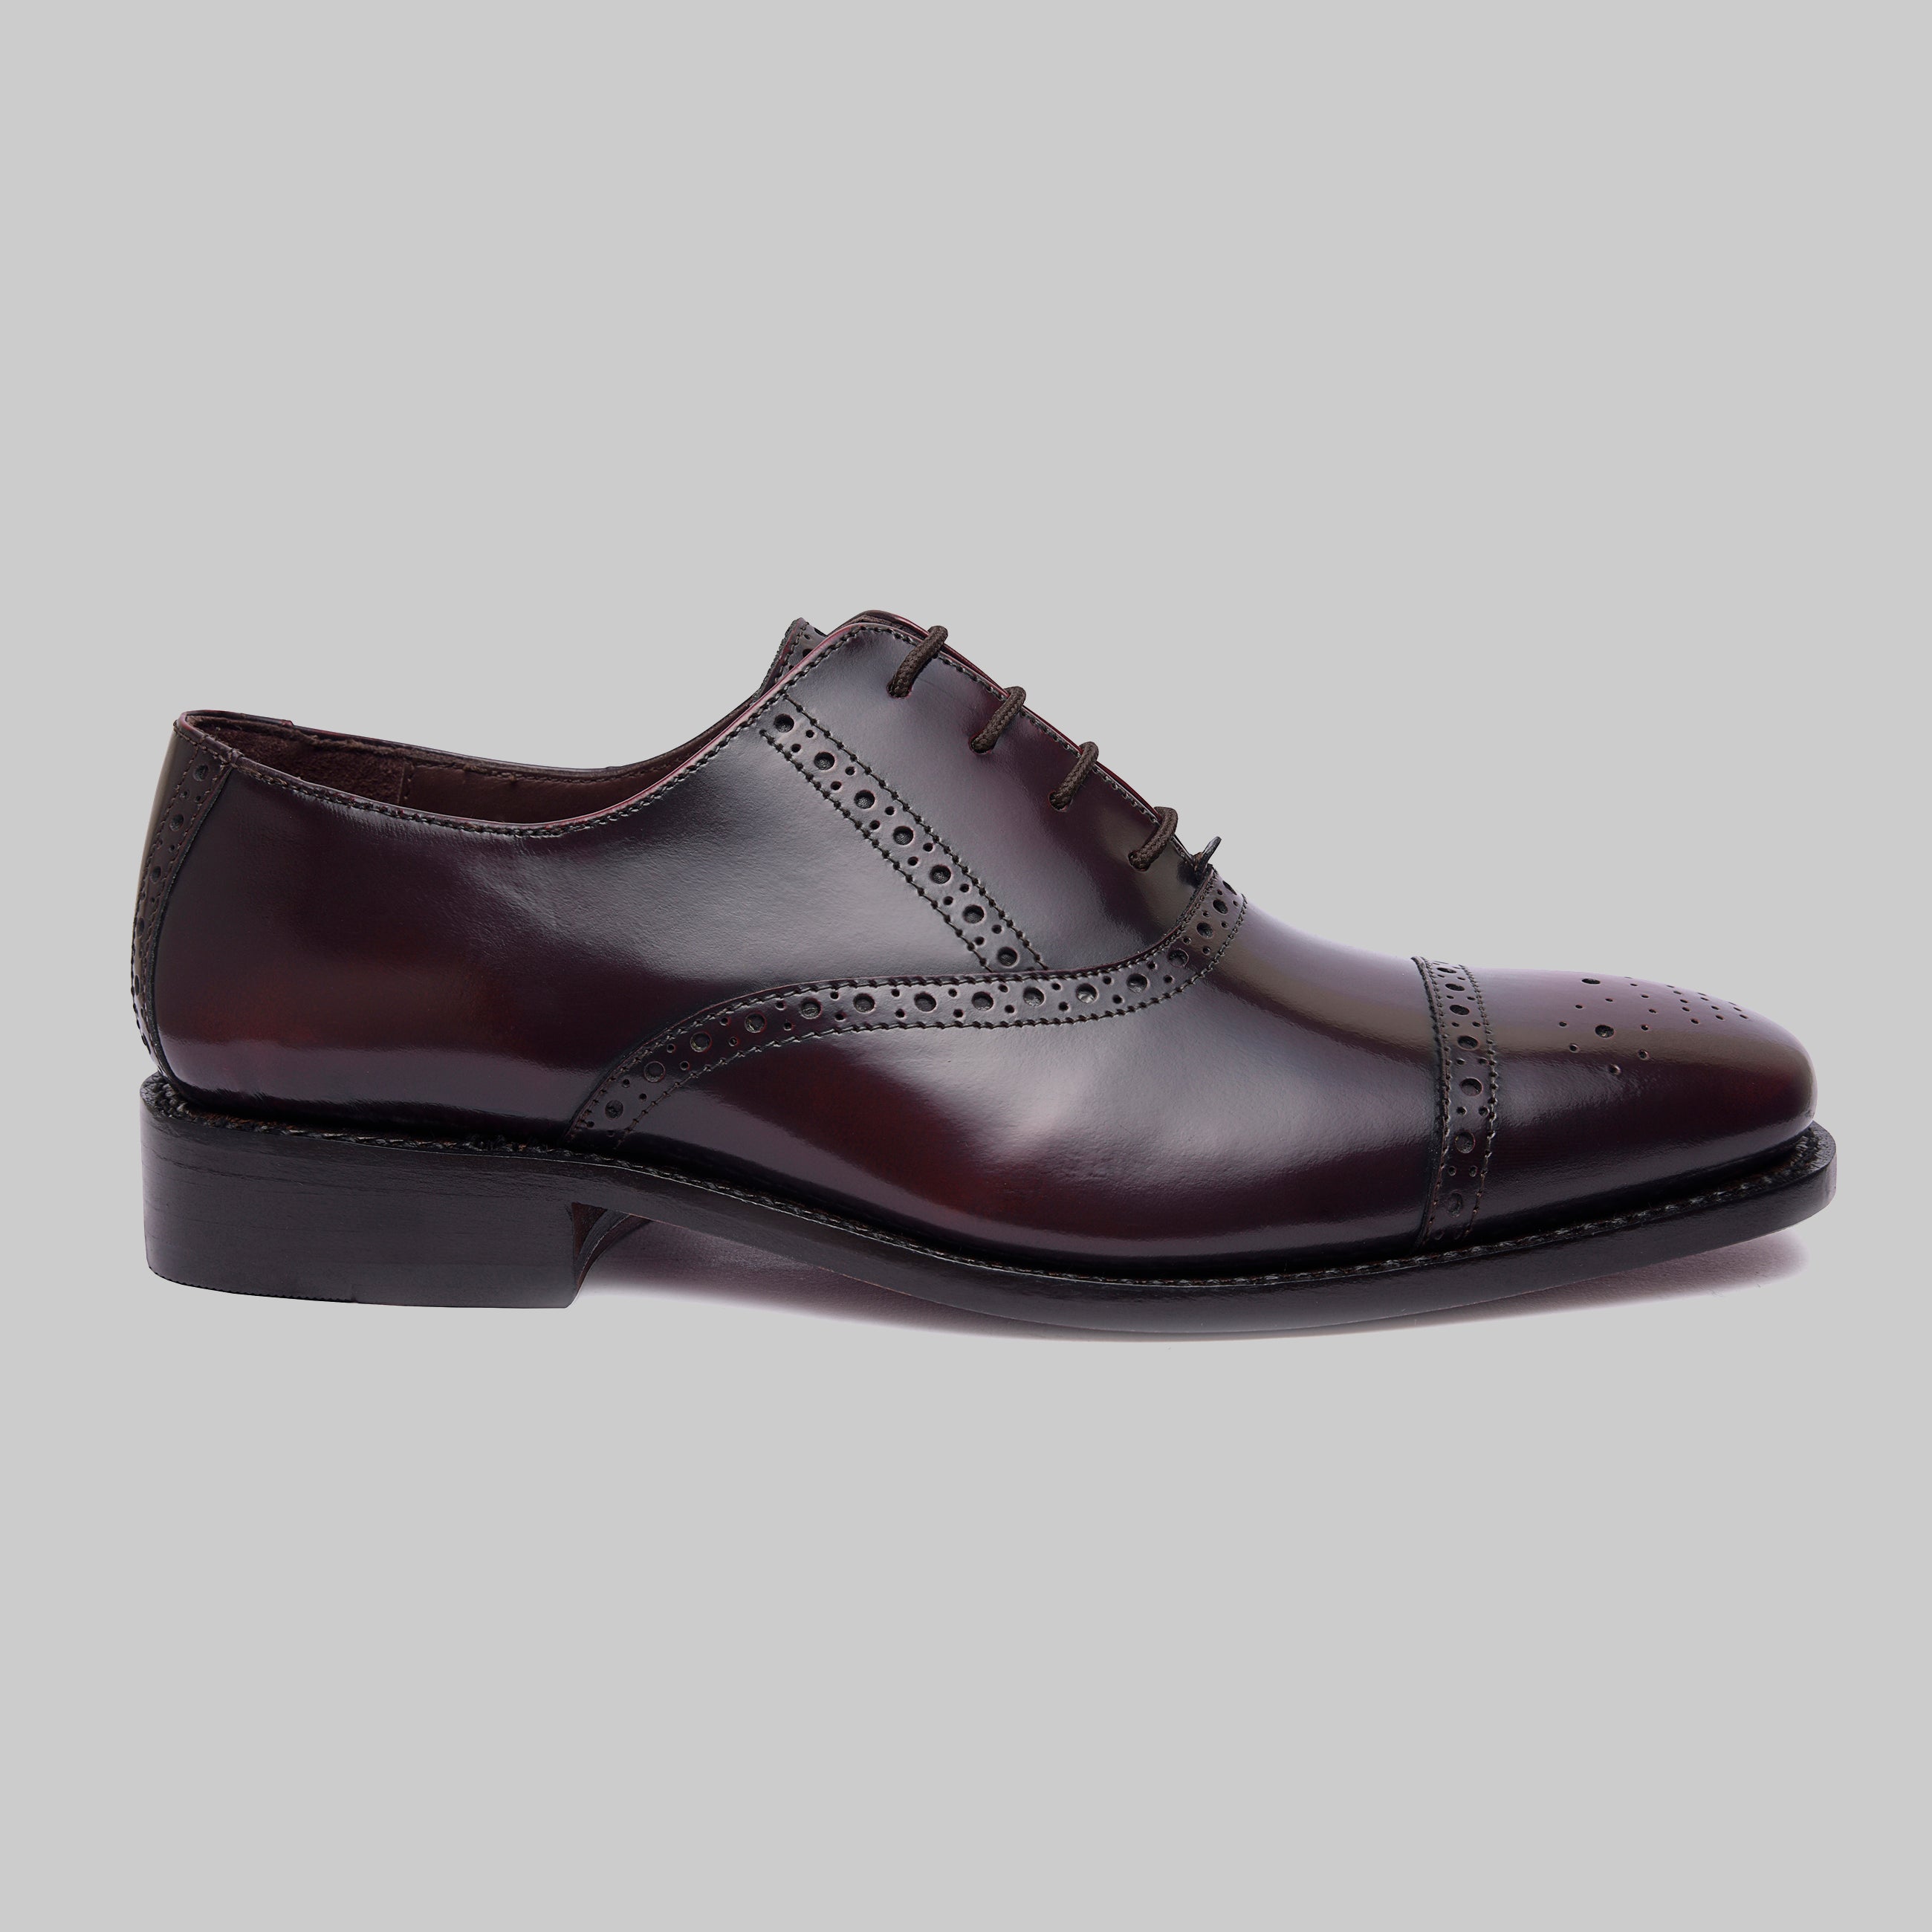 Tallon Goodyear Welted Cap Toe Wingtip Oxford Dress Shoes